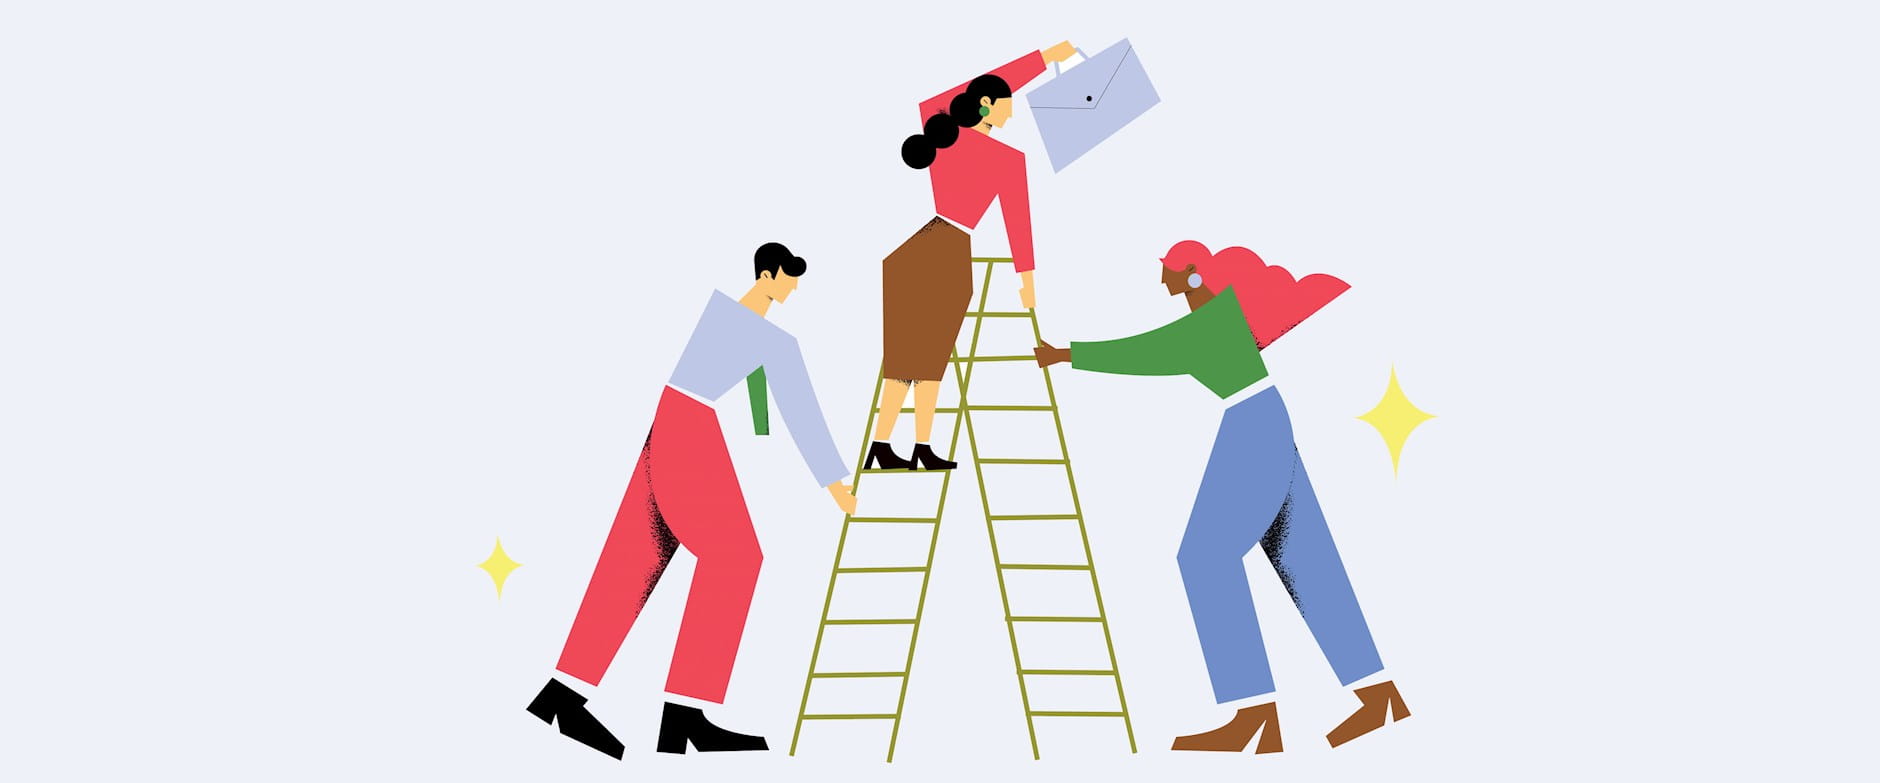 A business person climbing a ladder with the help of two colleagues